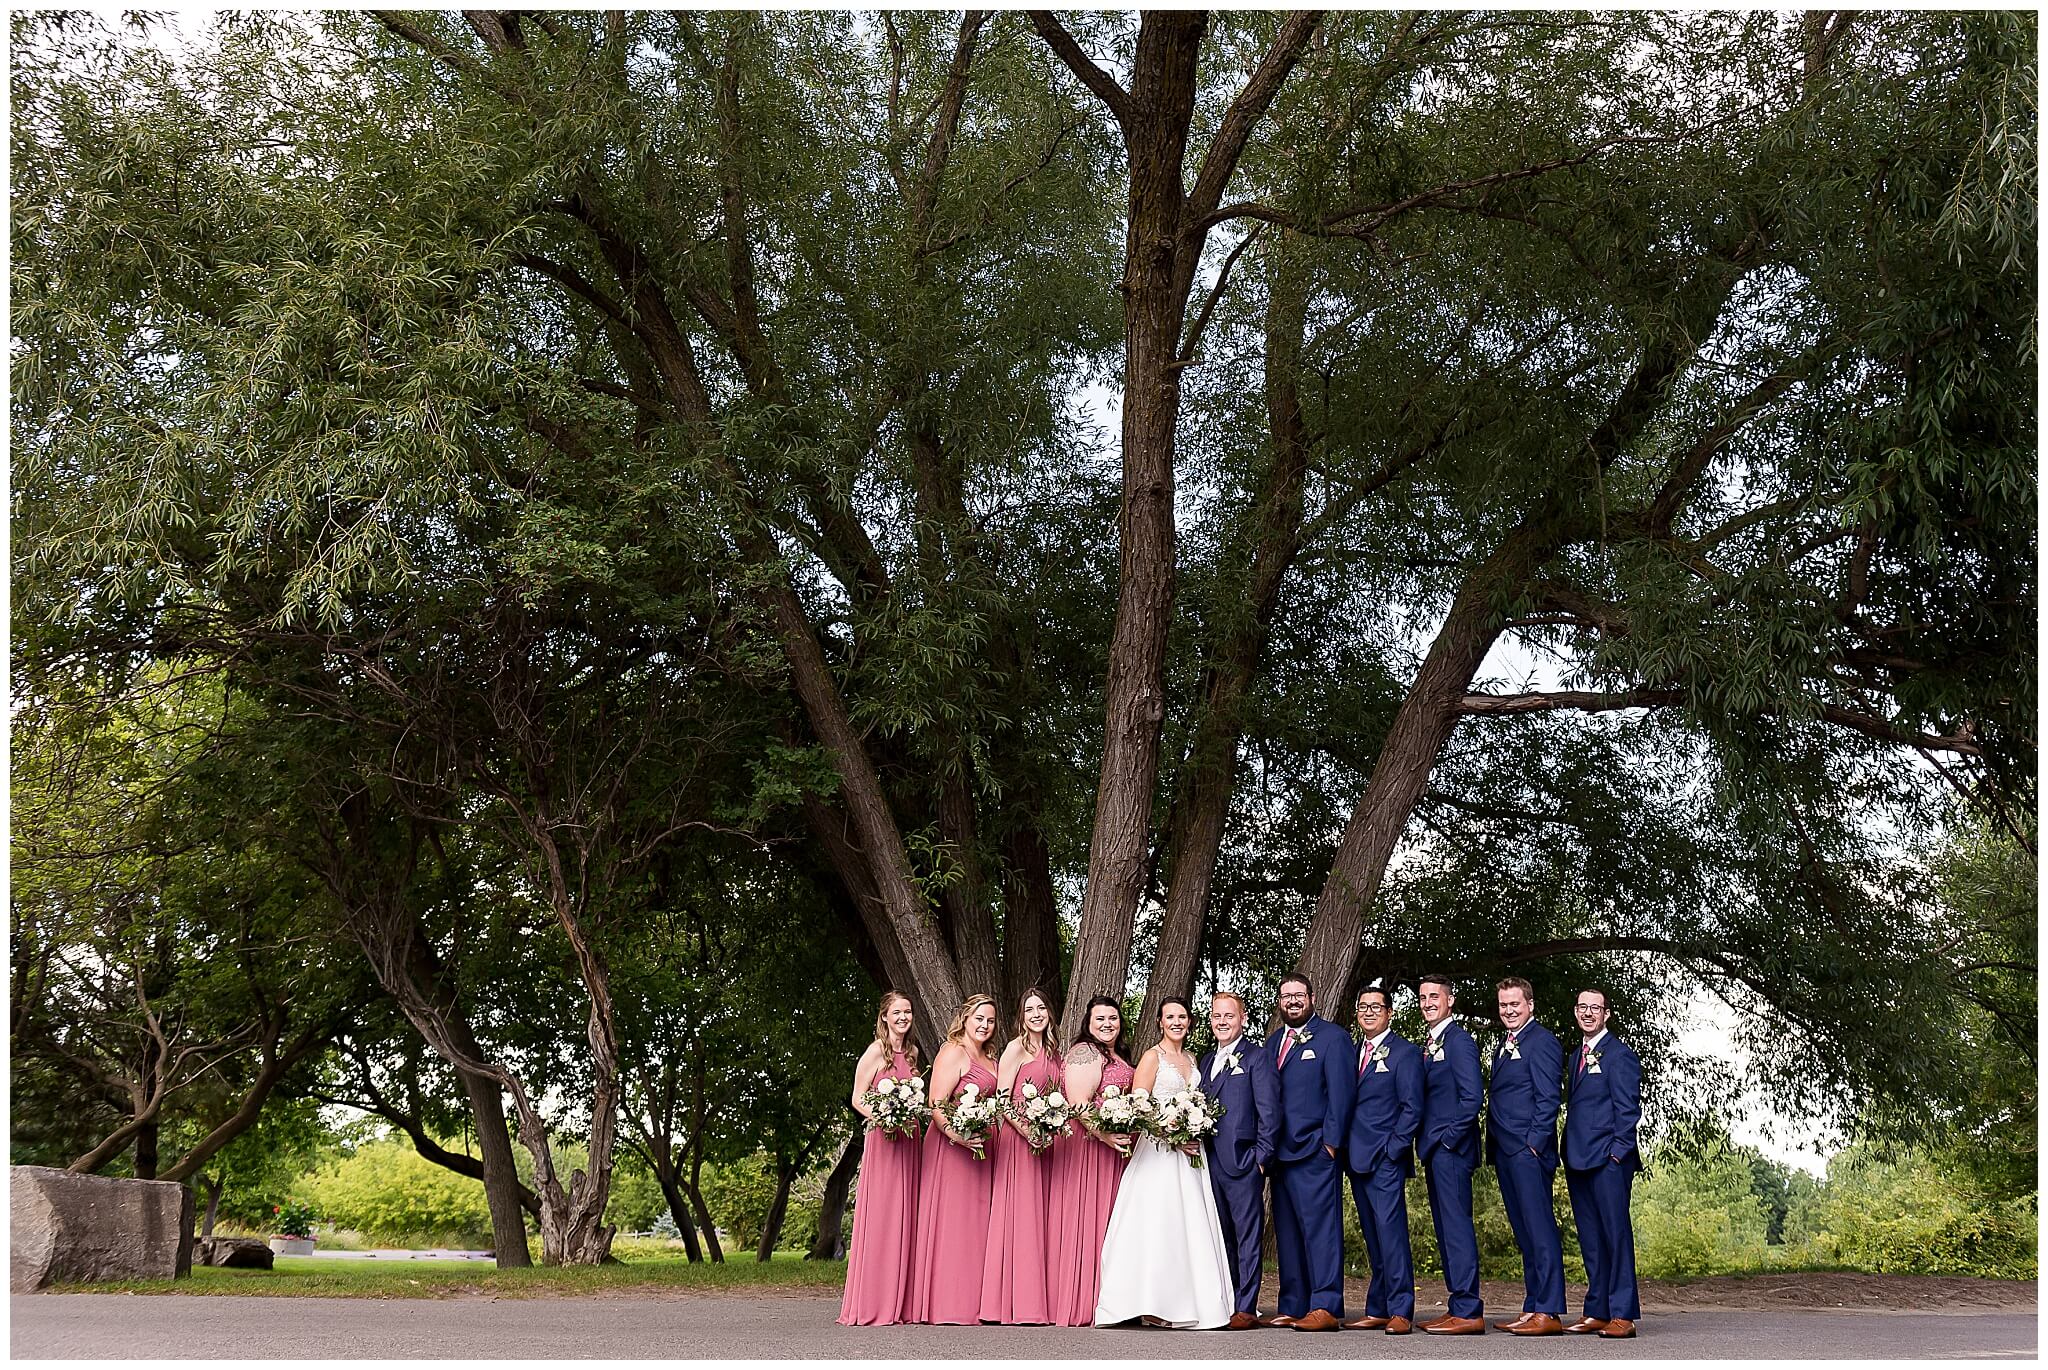 a group bridal party photo of bridesmaids in long rose dresses and groomsmen in blue suits underneath the large trees at The Marshes wedding venue